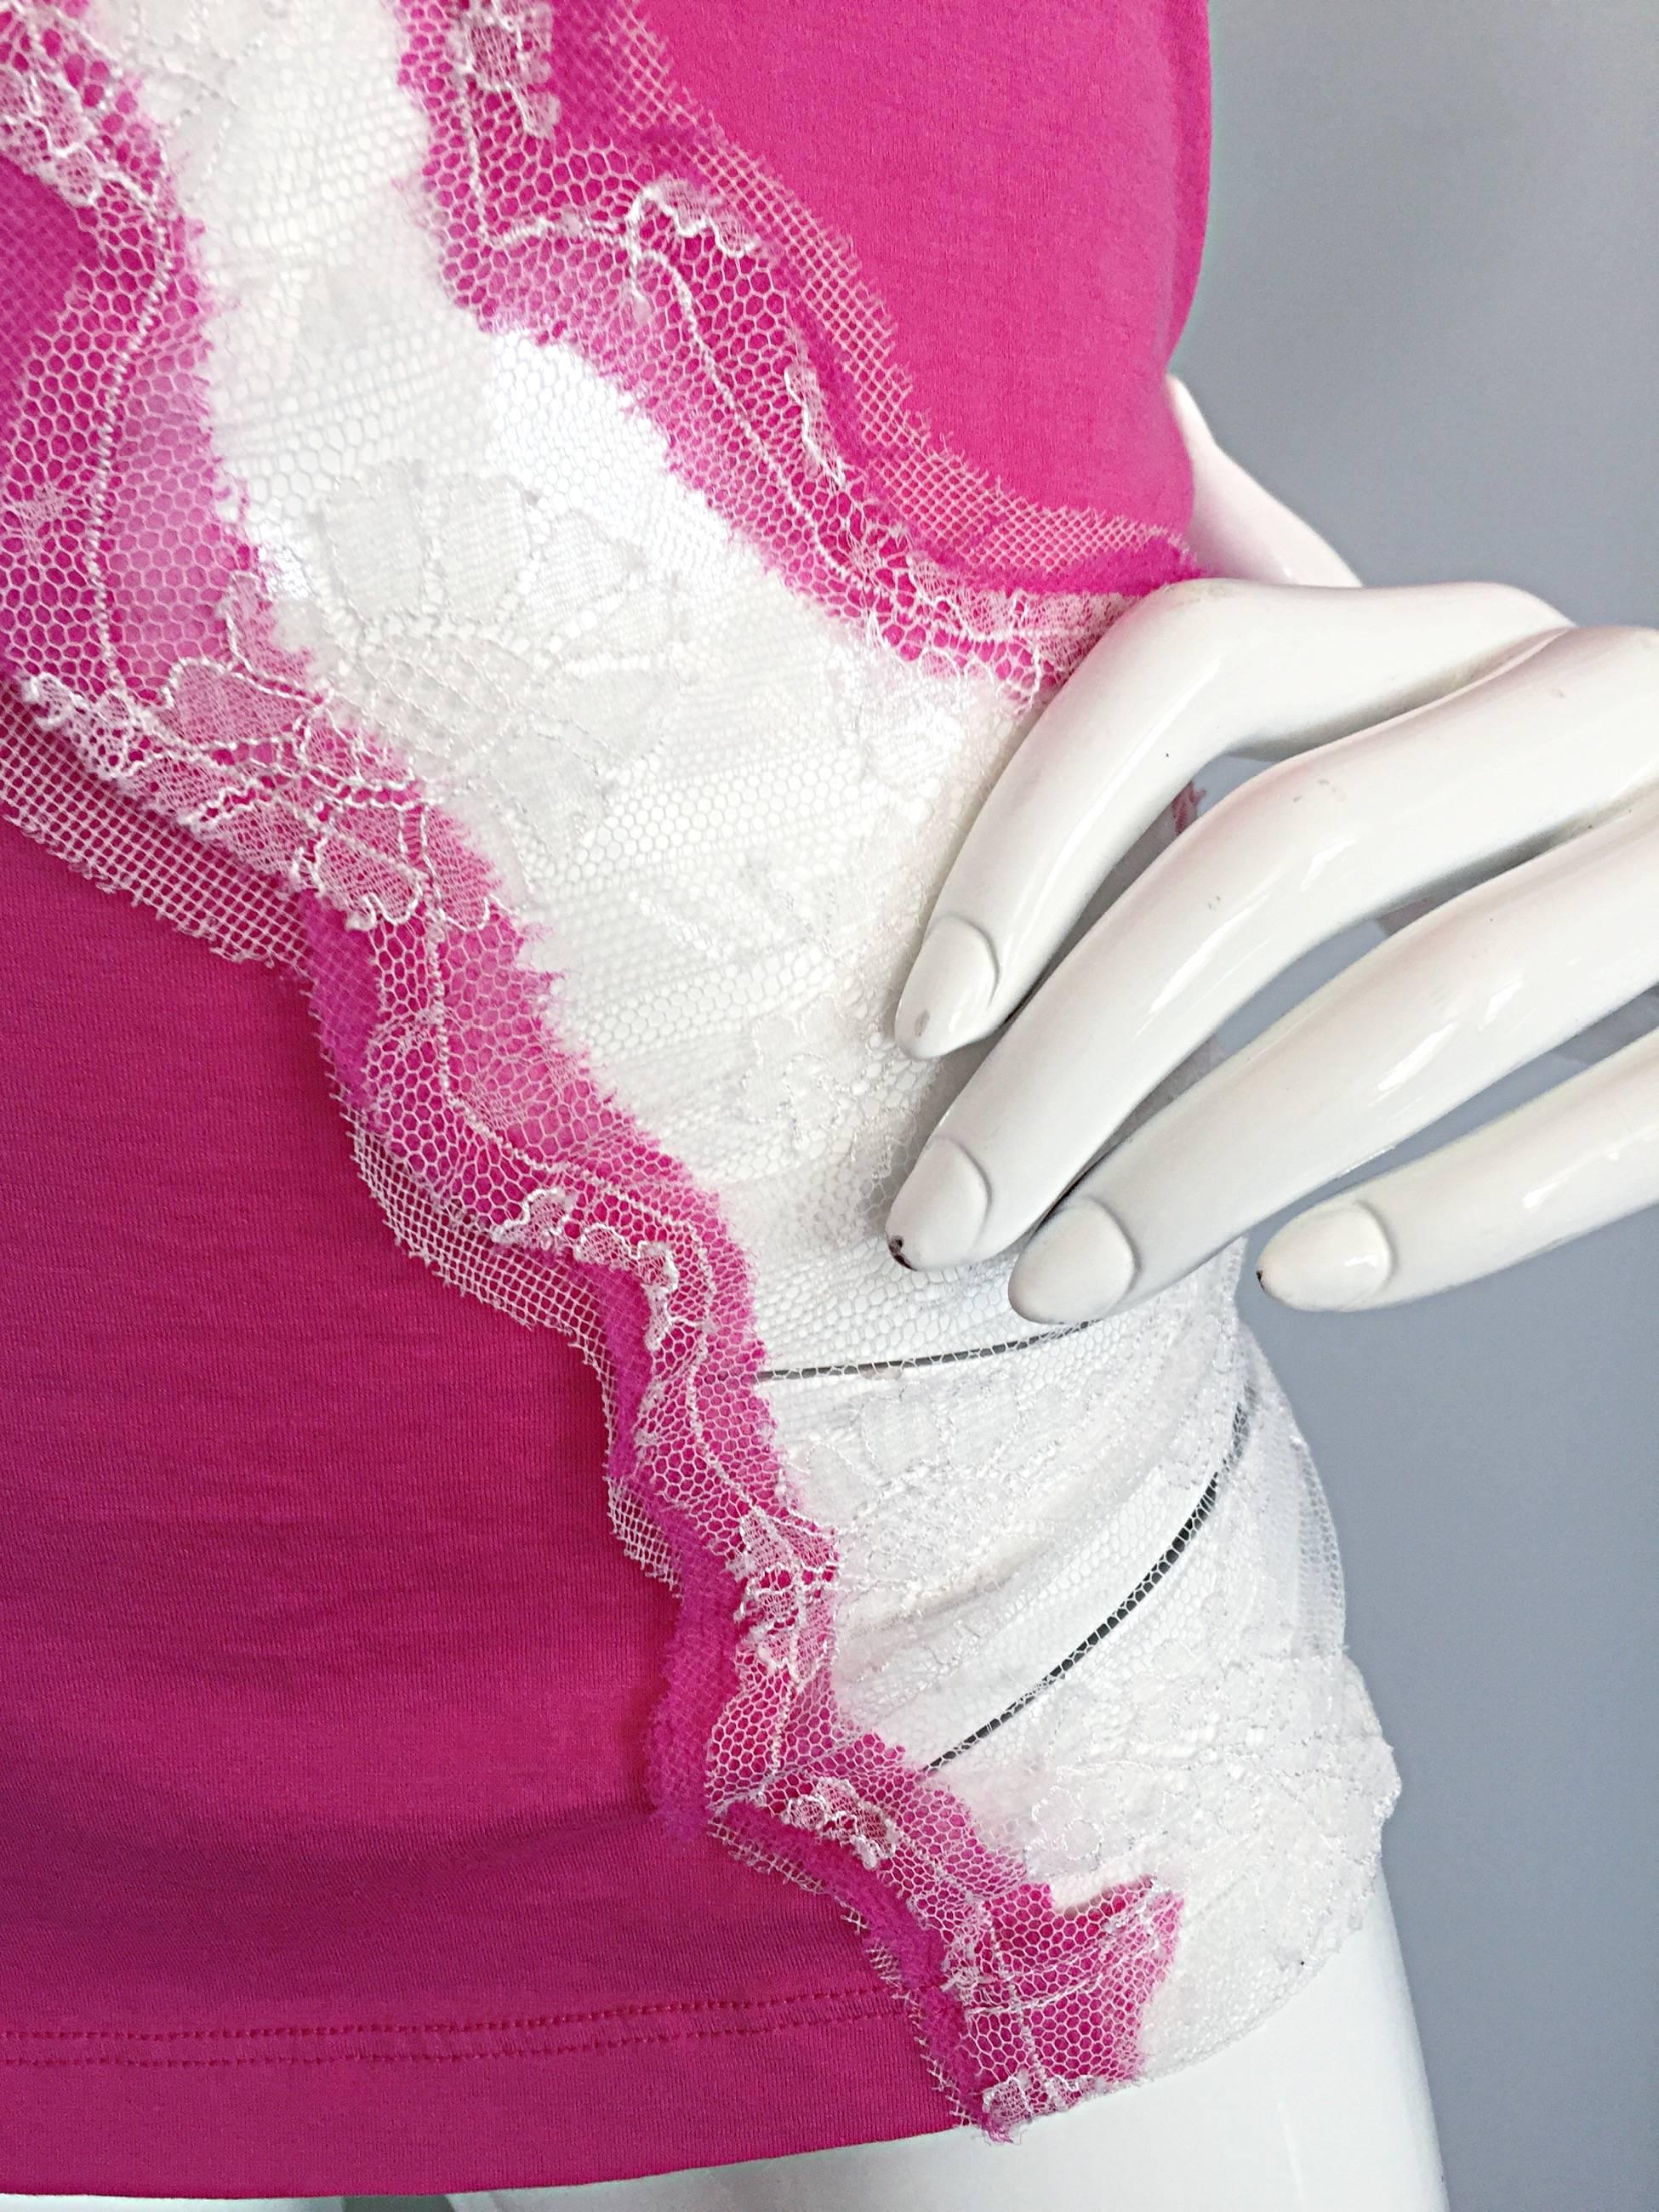 John Galliano Hot Pink + White Sleeveless Cotton Blouse w/ Lace Cut - Outs  In Excellent Condition For Sale In San Diego, CA